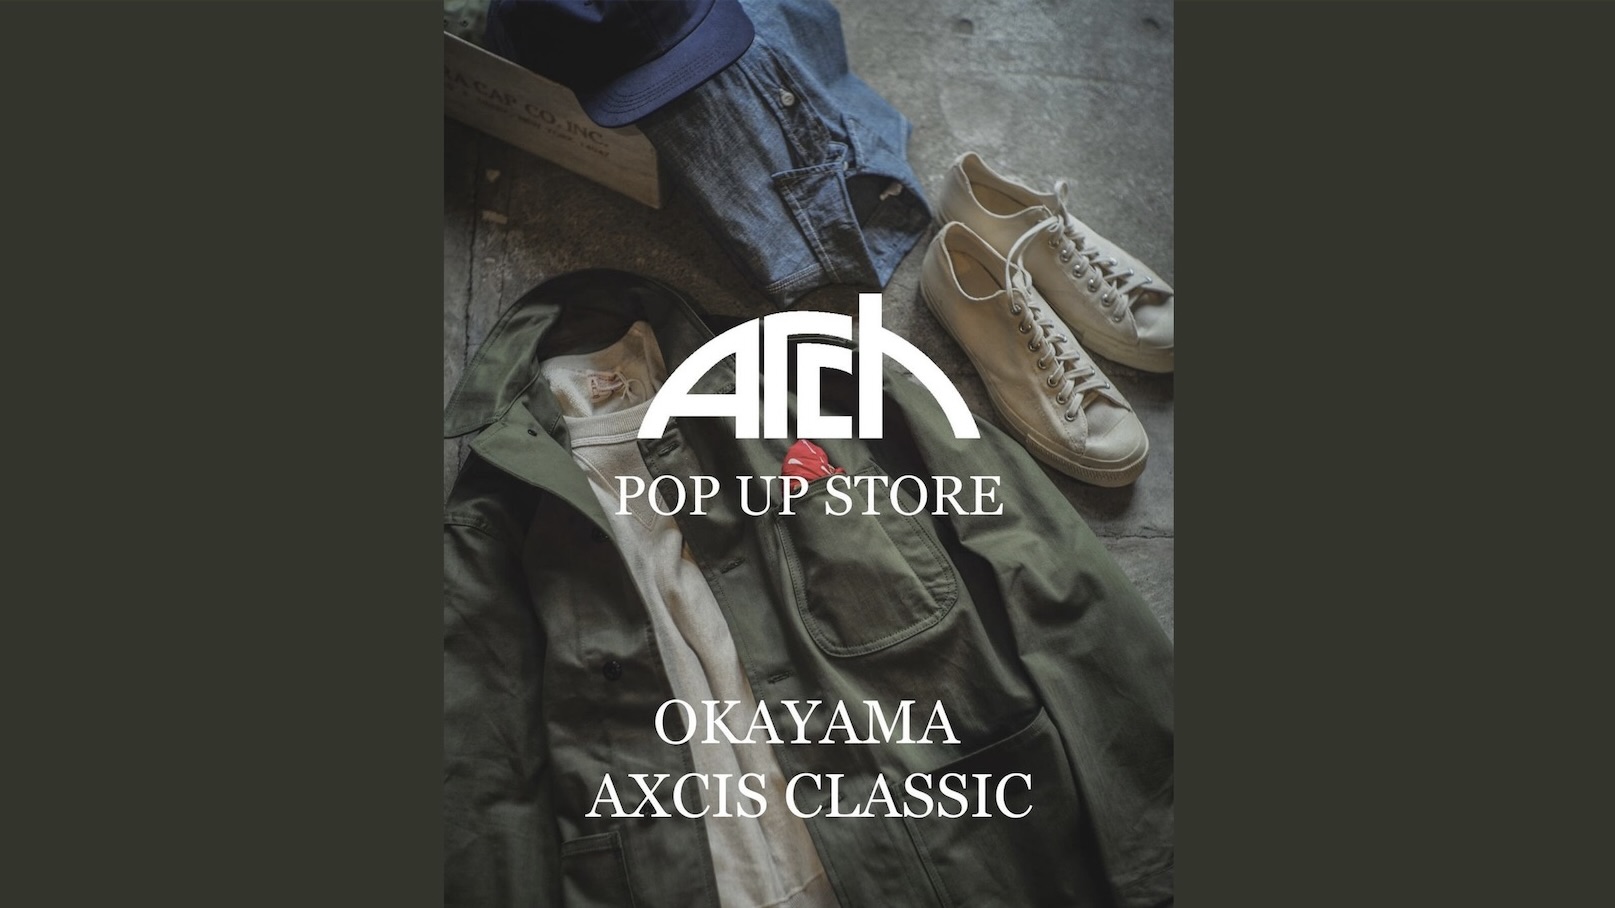 ARCH POP UP STORE in 岡山 AXCIS CLASSIC